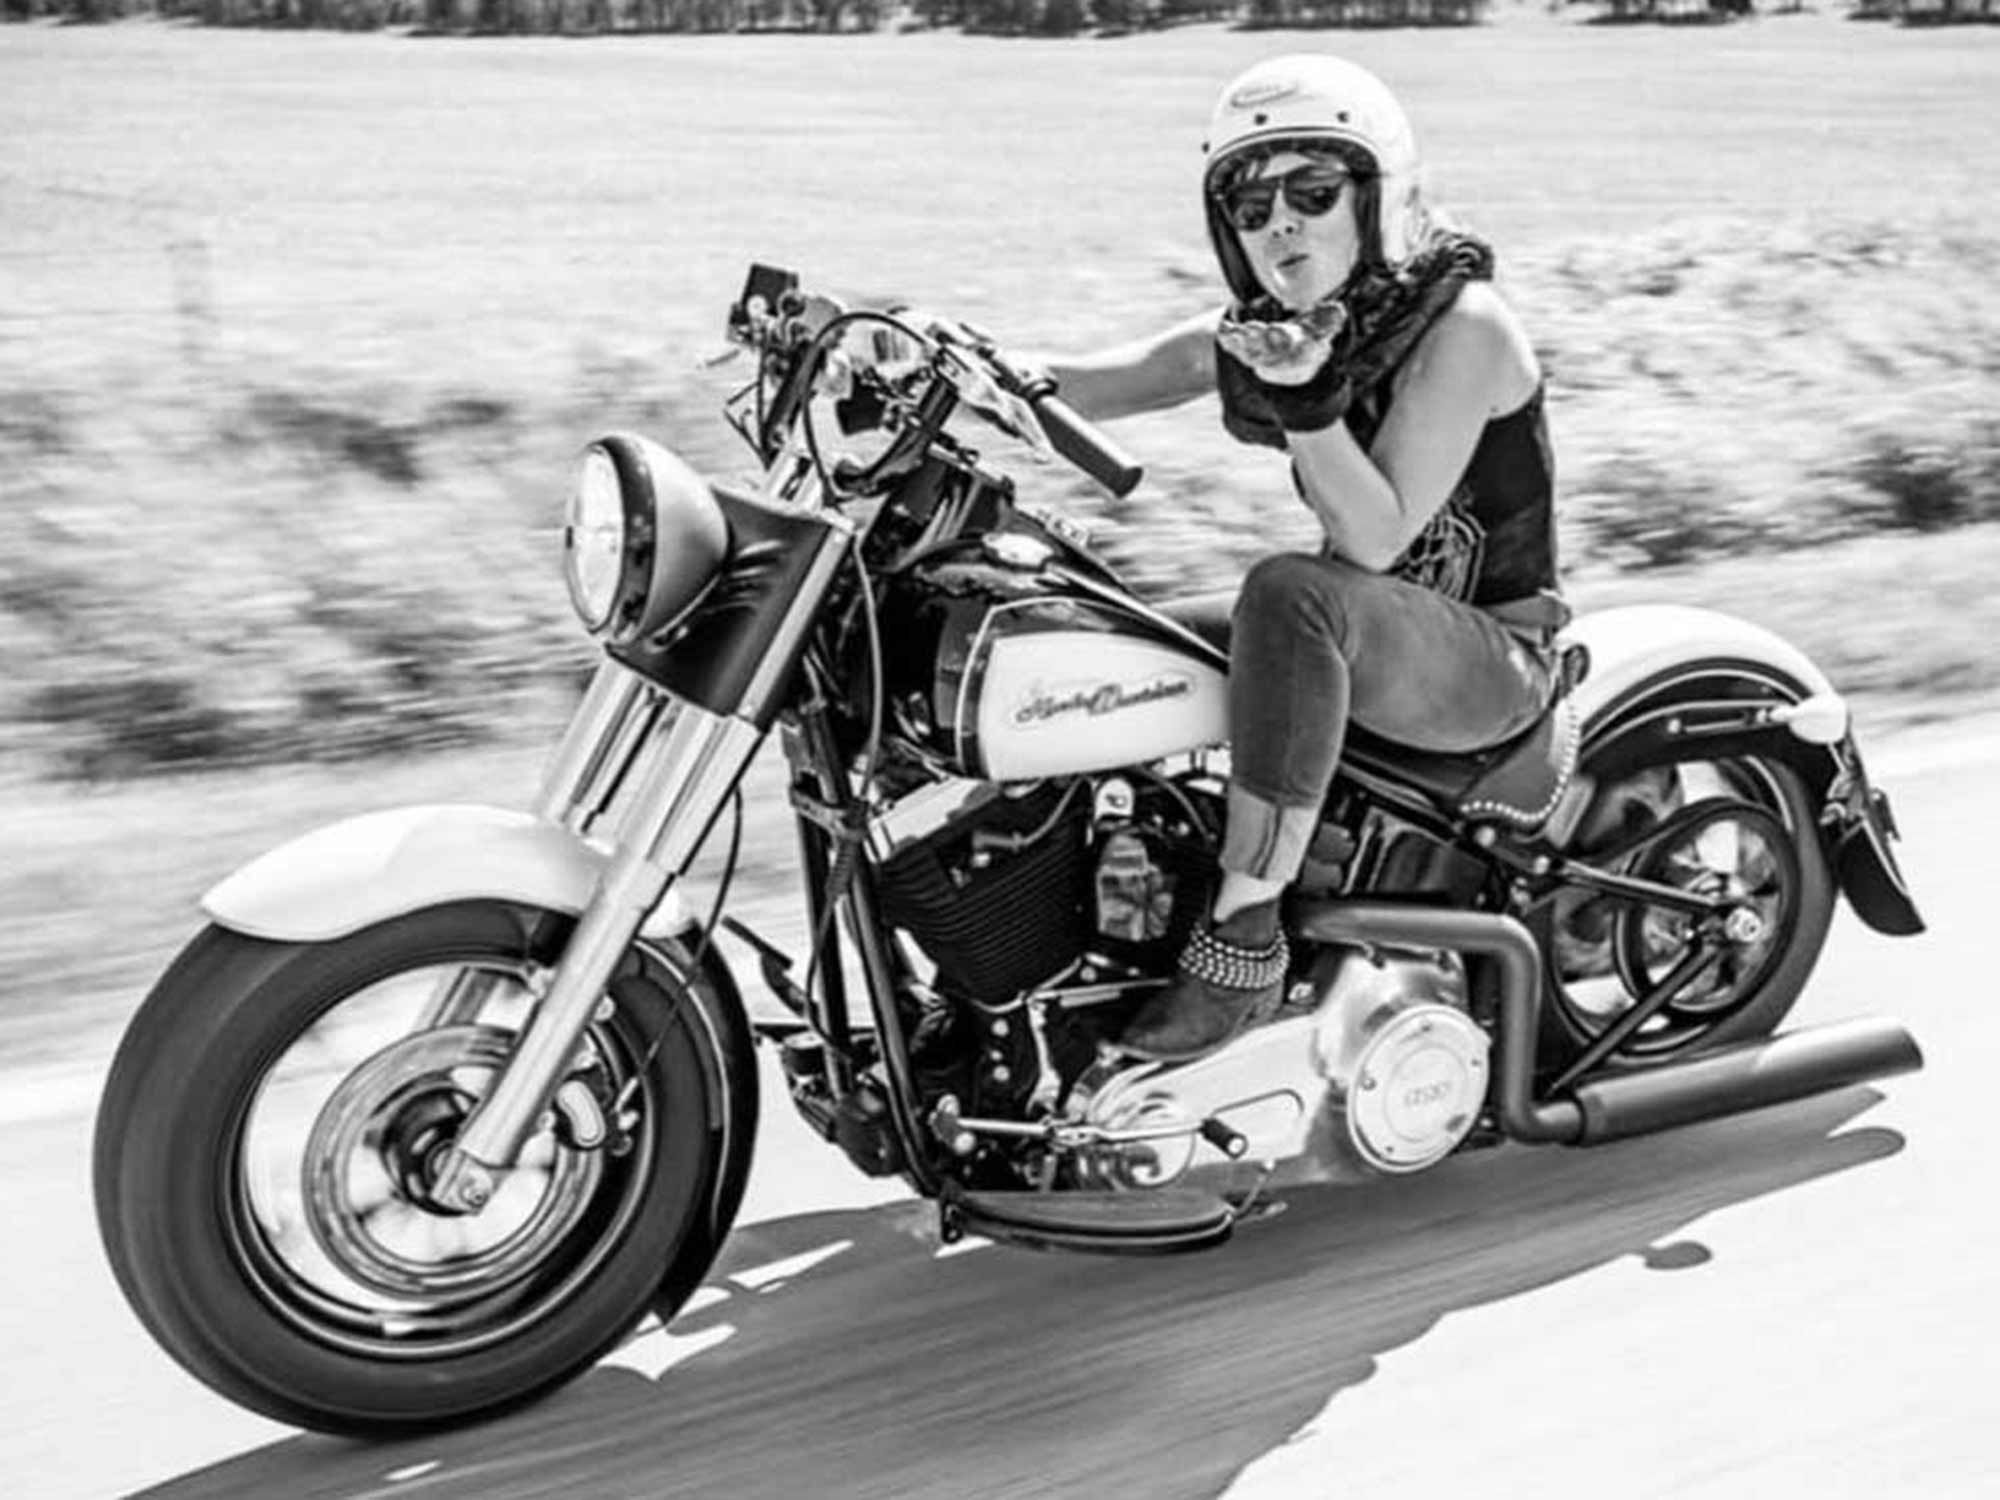 Jessi Combs Posthumously Named Fastest Woman Motorcycle Cruiser